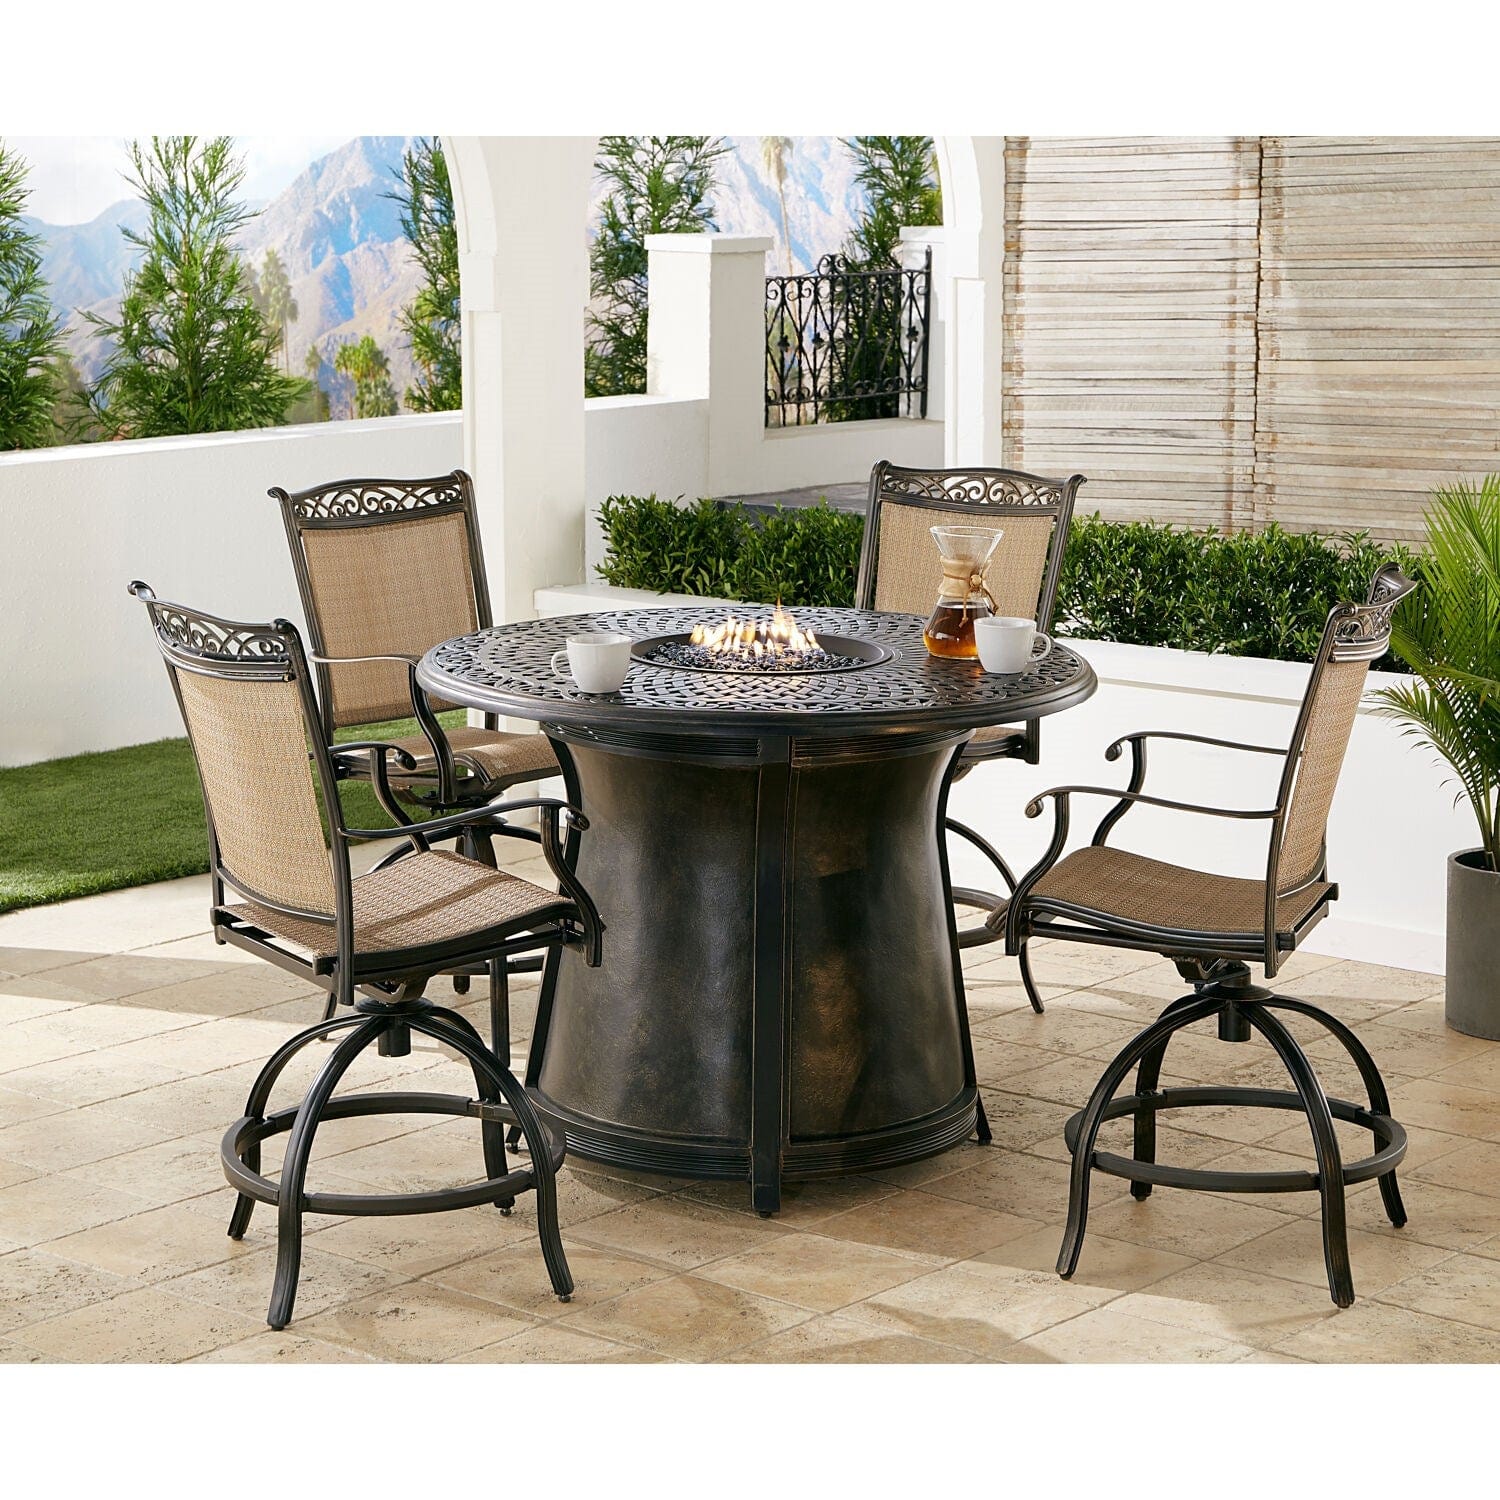 Hanover Fire Pit Dining Set Hanover Fontana 5-Piece High-Dining Set in Tan with 4 Counter-Height Swivel Chairs and a 40,000 BTU Cast-top Fire Pit Table | FNT5PCPFPRD-BR